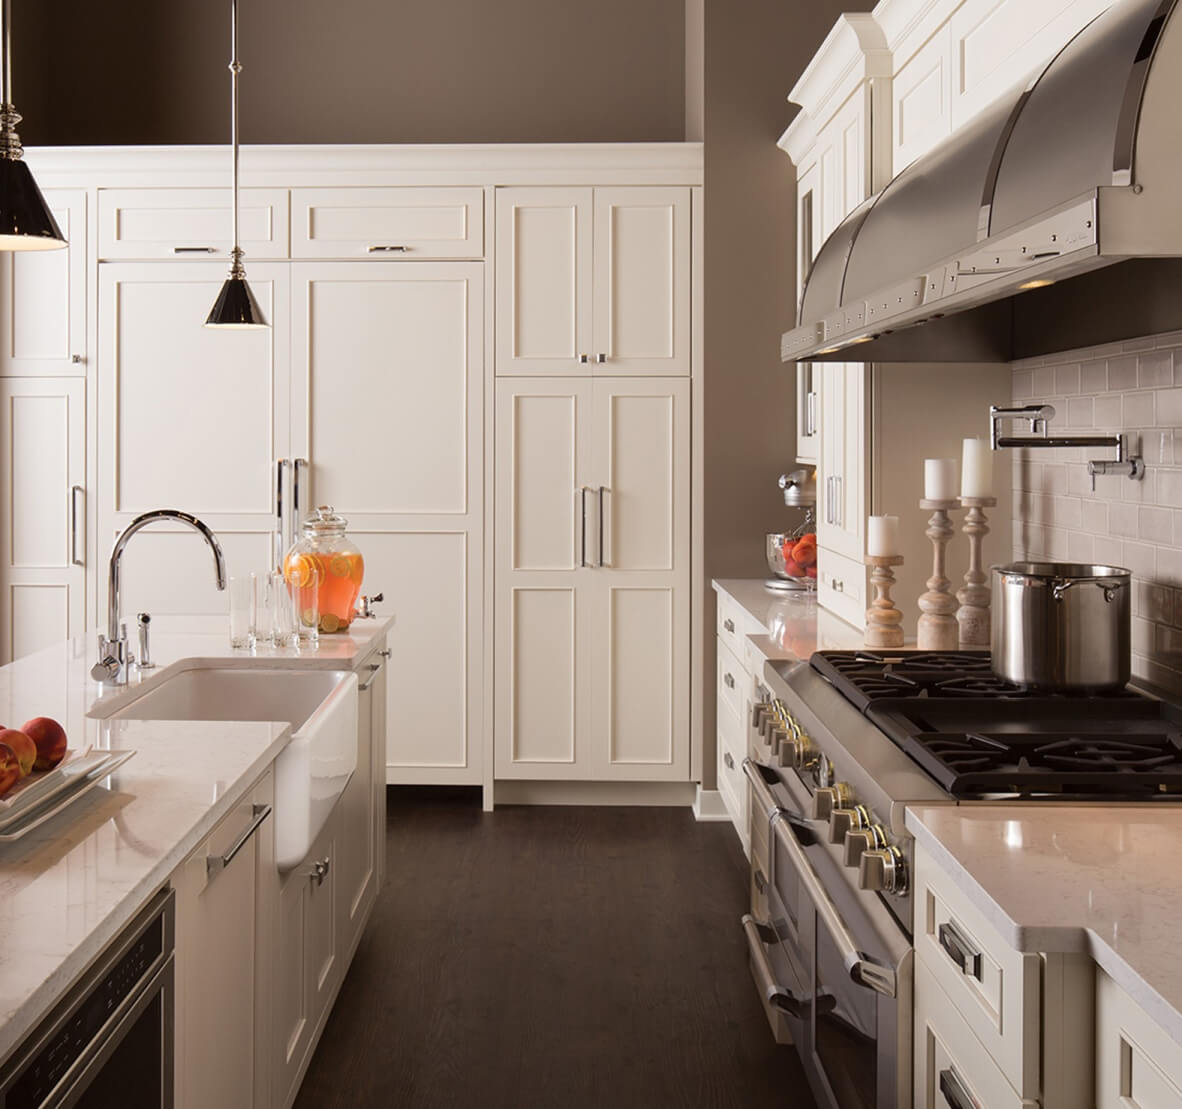 A kitchen storage wall with multiple pantry cabinets and Refrigeration featuring white painted Dura Supreme Cabinetry.